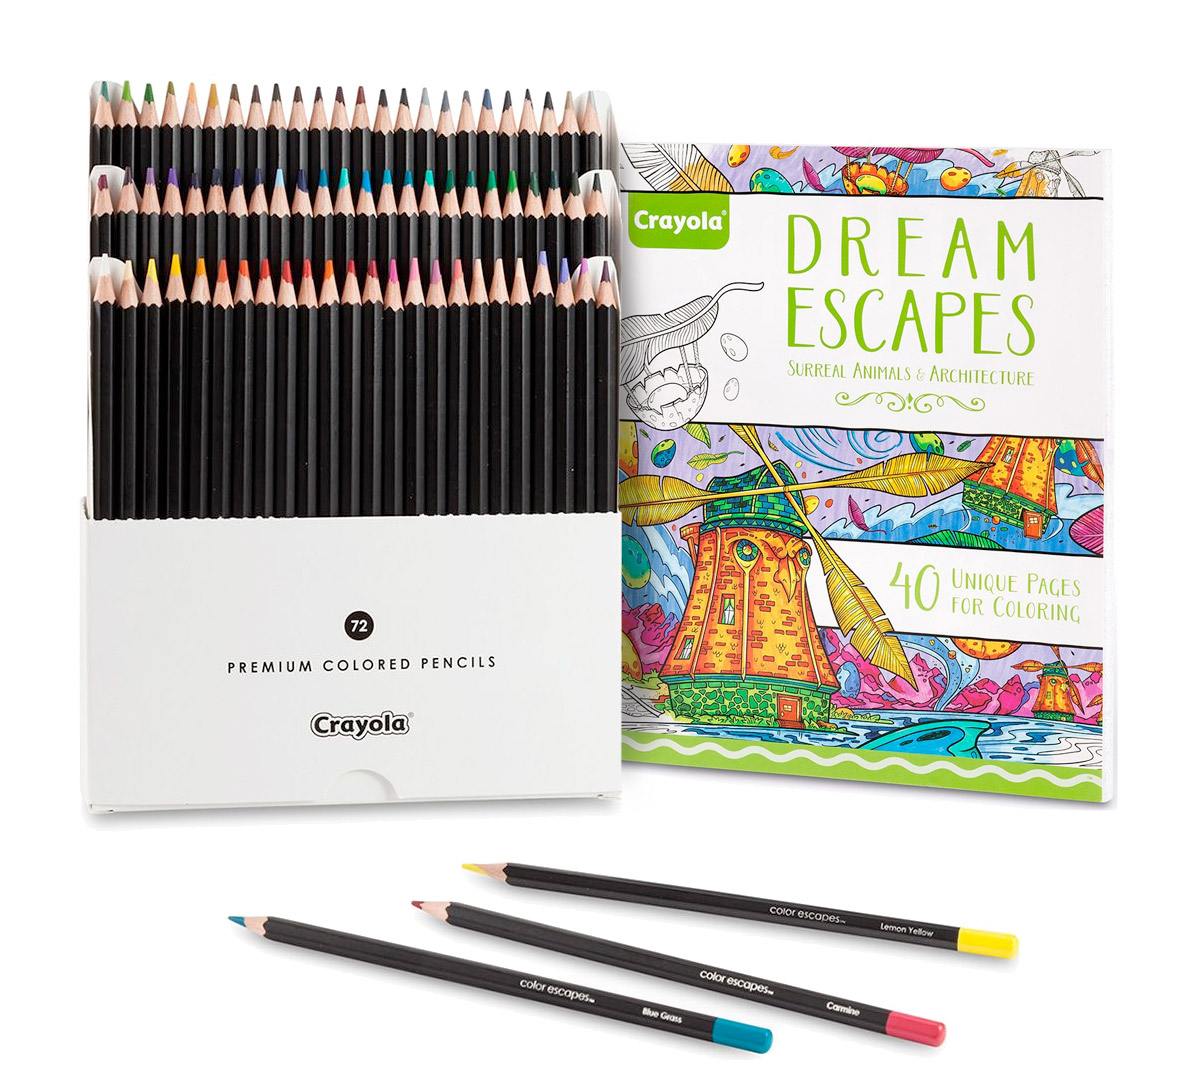 The perfect bundle for Dreaming away, the Dream Escapes Coloring Book ...